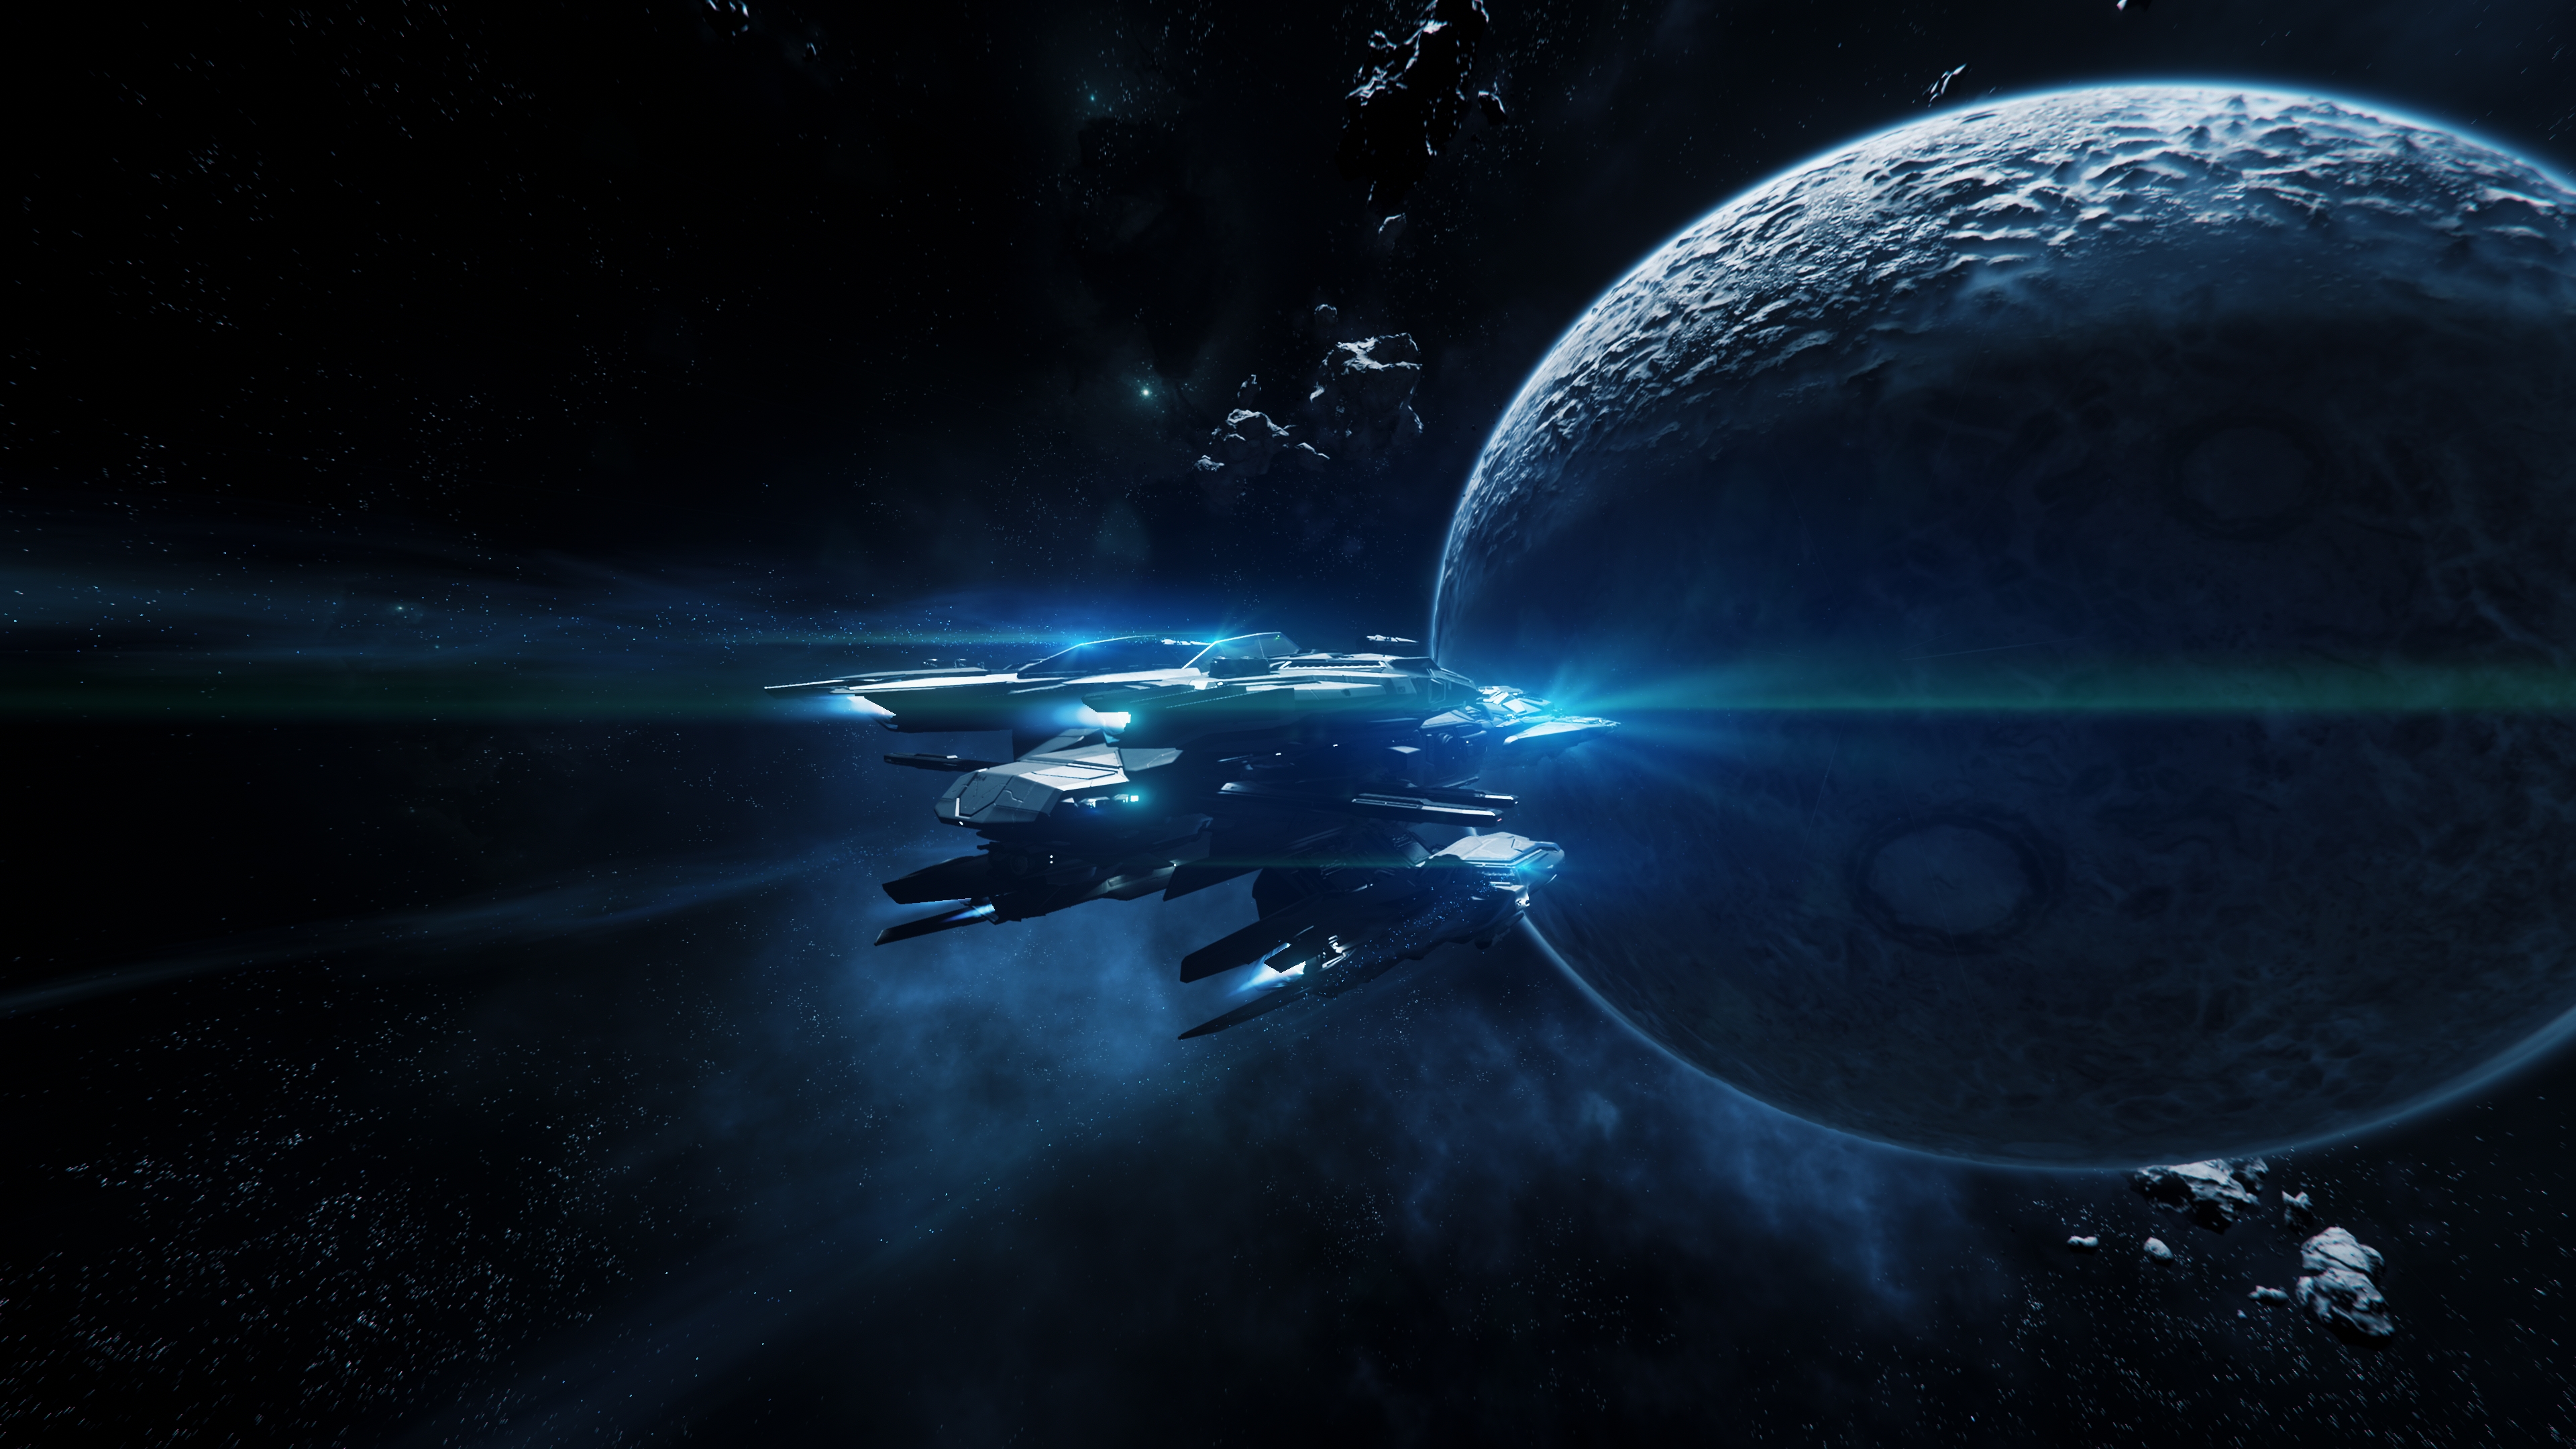 50+ Constellation Andromeda (Star Citizen) HD Wallpapers and Backgrounds